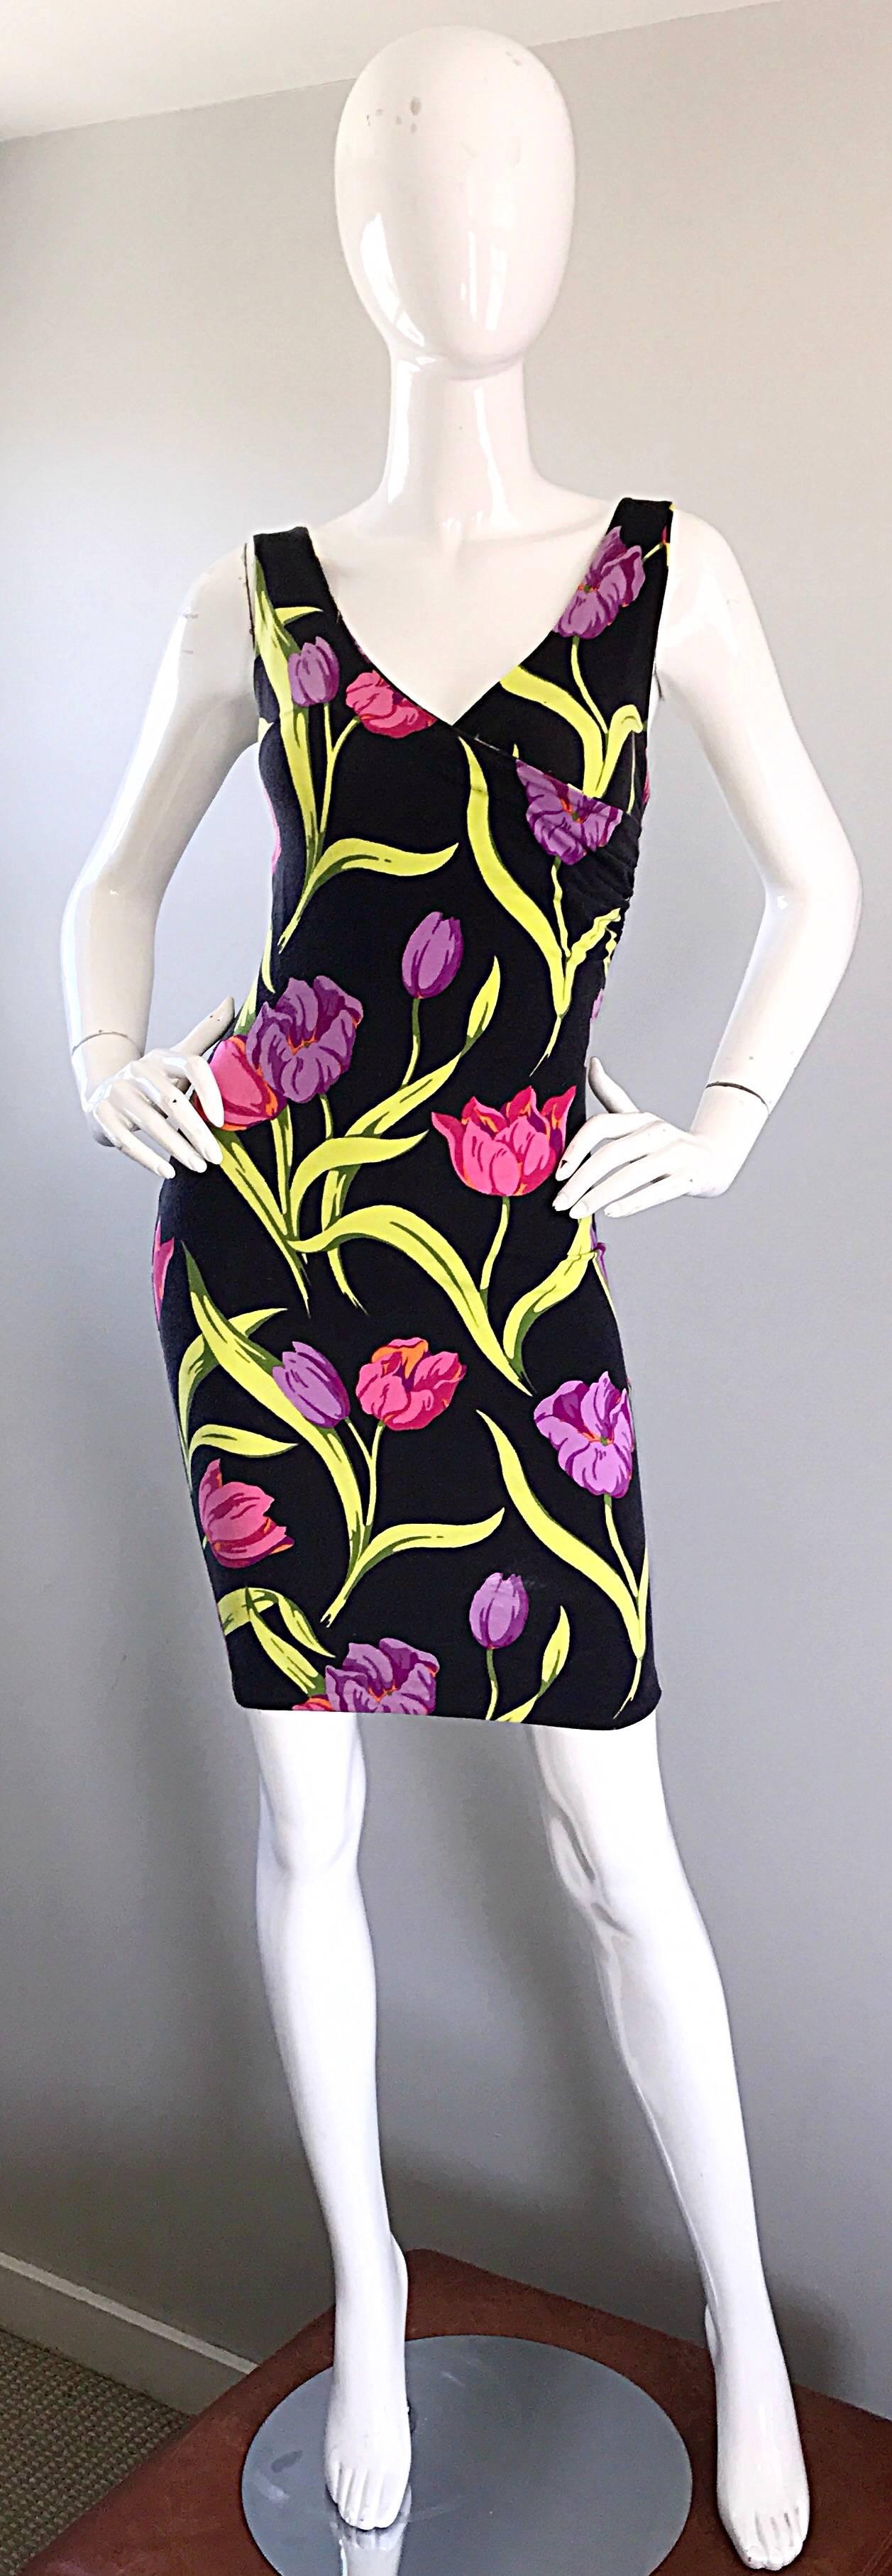 Sexy early vintage BETSEY JOHNSON 'Punk Label' bodcon dress! I have owned this dress once before, and it sold almost immediately! Vibrant hues of pink, green and purple on a black background. Tulip print thorughout. Crossover bust, with a flattering